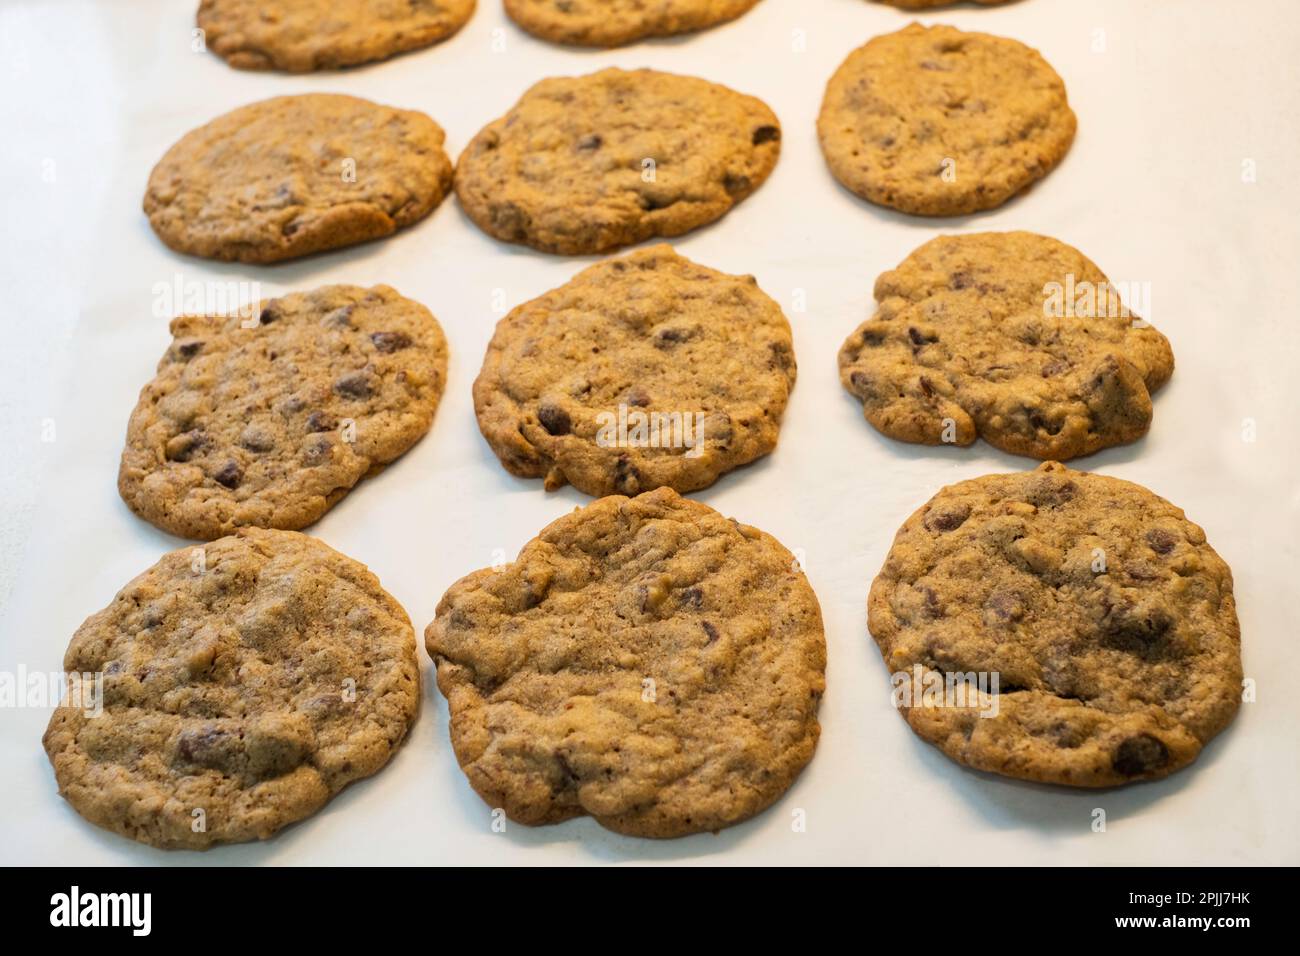 Homemade chocolate chip cookies or biscuits cooling on parchment paper after removing from oven & pan. Stock Photo